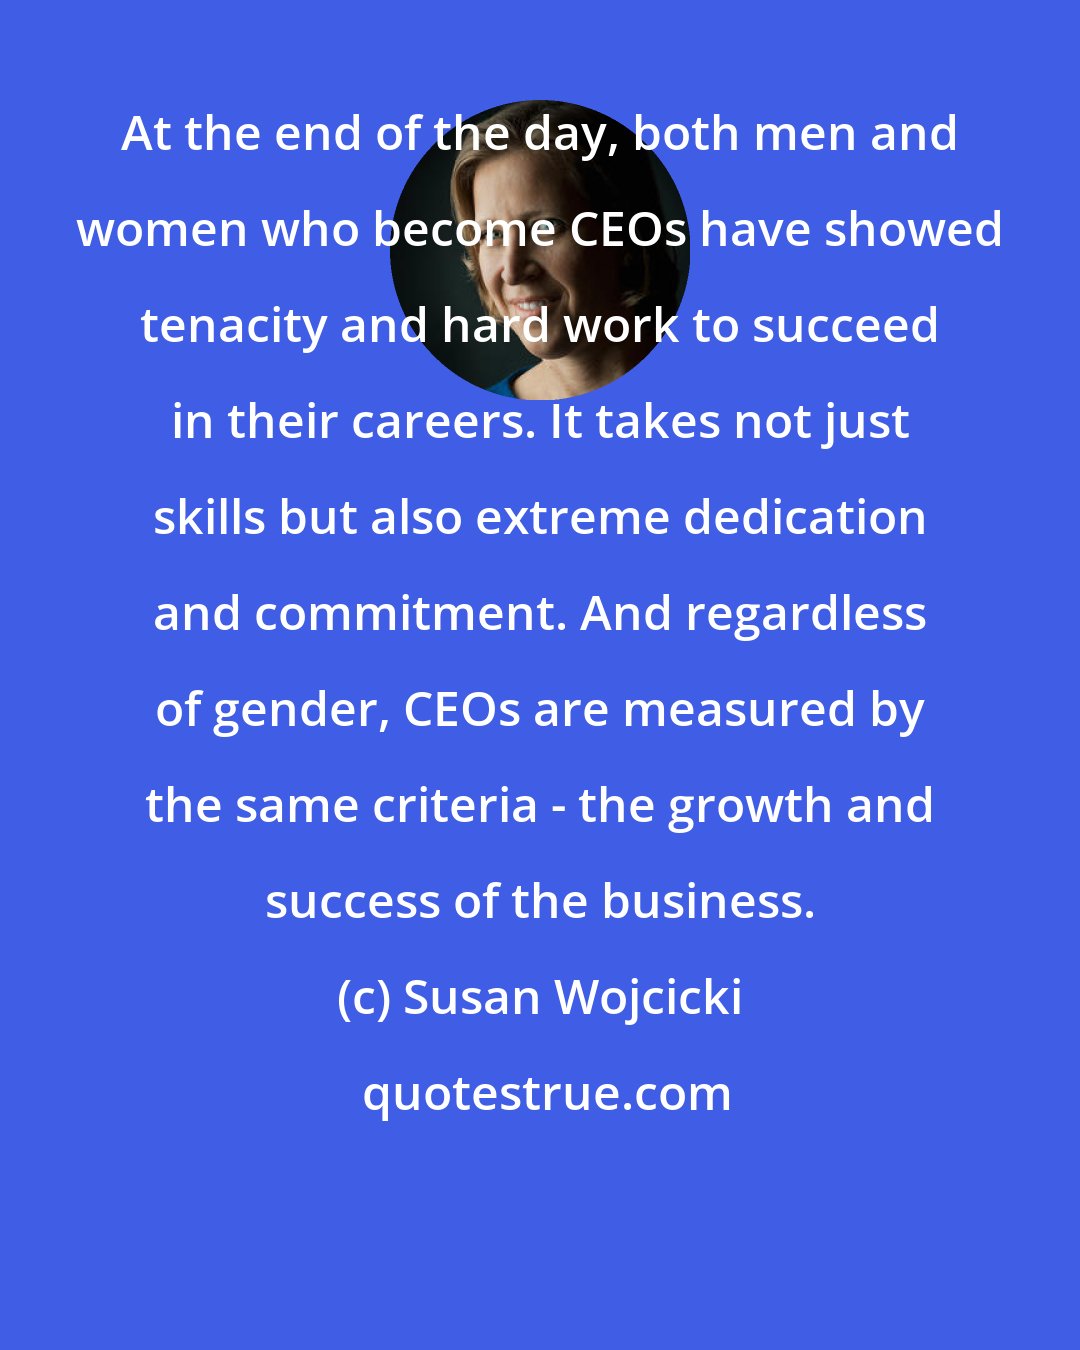 Susan Wojcicki: At the end of the day, both men and women who become CEOs have showed tenacity and hard work to succeed in their careers. It takes not just skills but also extreme dedication and commitment. And regardless of gender, CEOs are measured by the same criteria - the growth and success of the business.